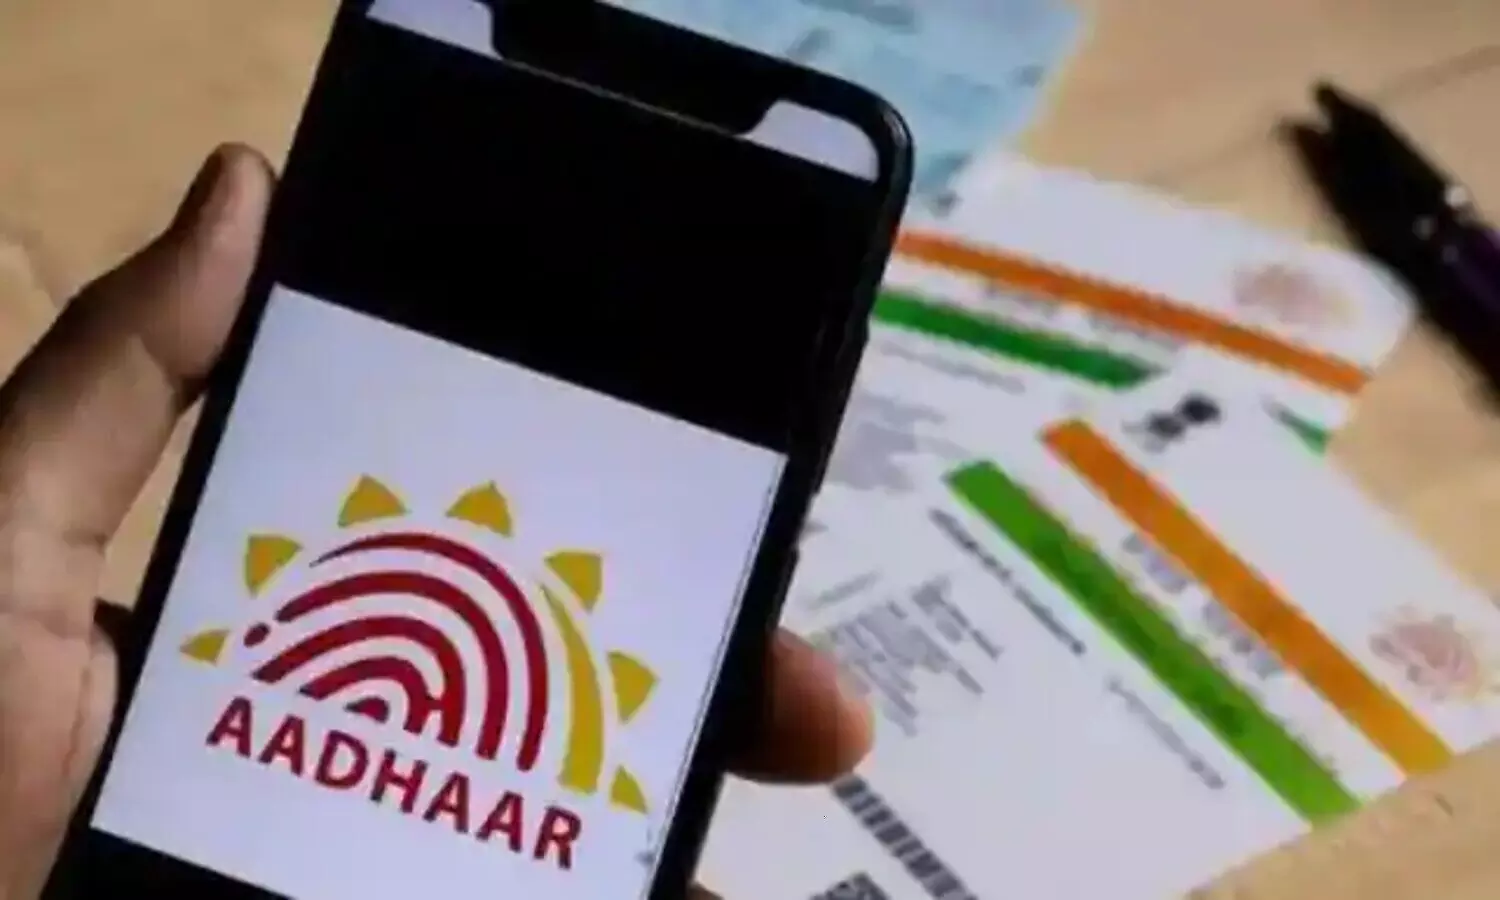 Aadhar card correction in the ration shop